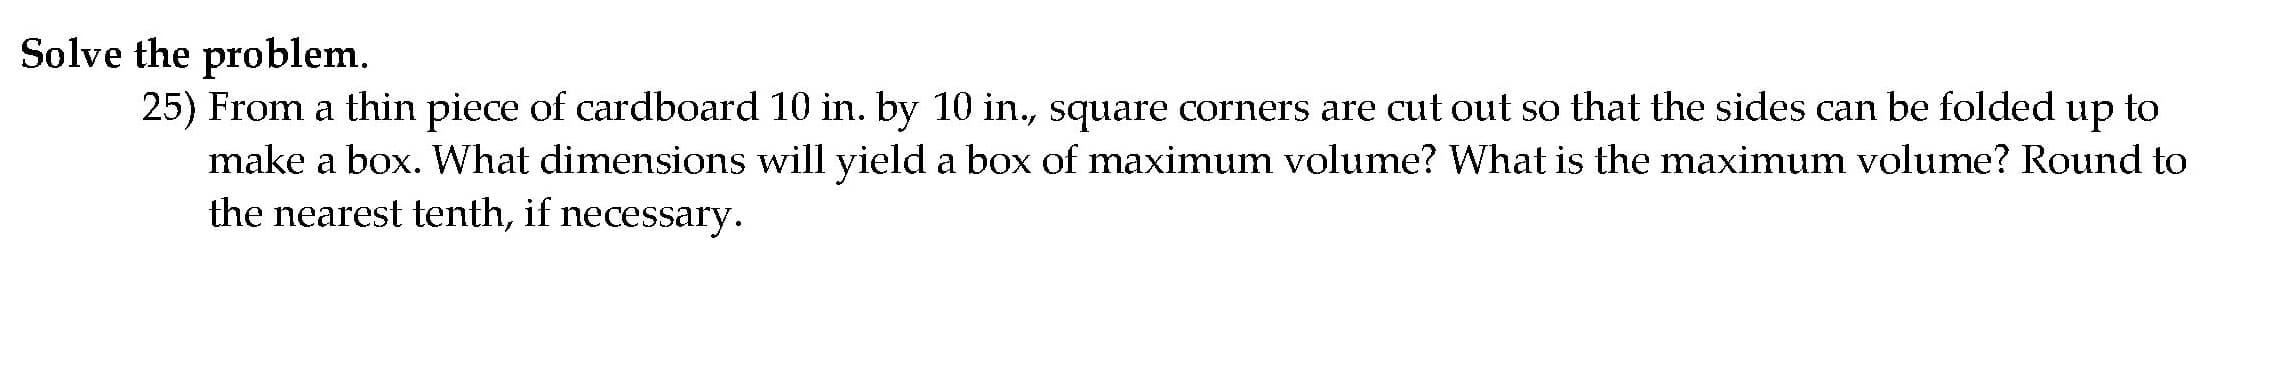 25) From a thin piece of cardboard 10 in. by 10 in., square corners are cut out so that the sides can be folded up to
make a box. What dimensions will yield a box of maximum volume? What is the maximum volume? Round to
the nearest tenth, if necessary.
